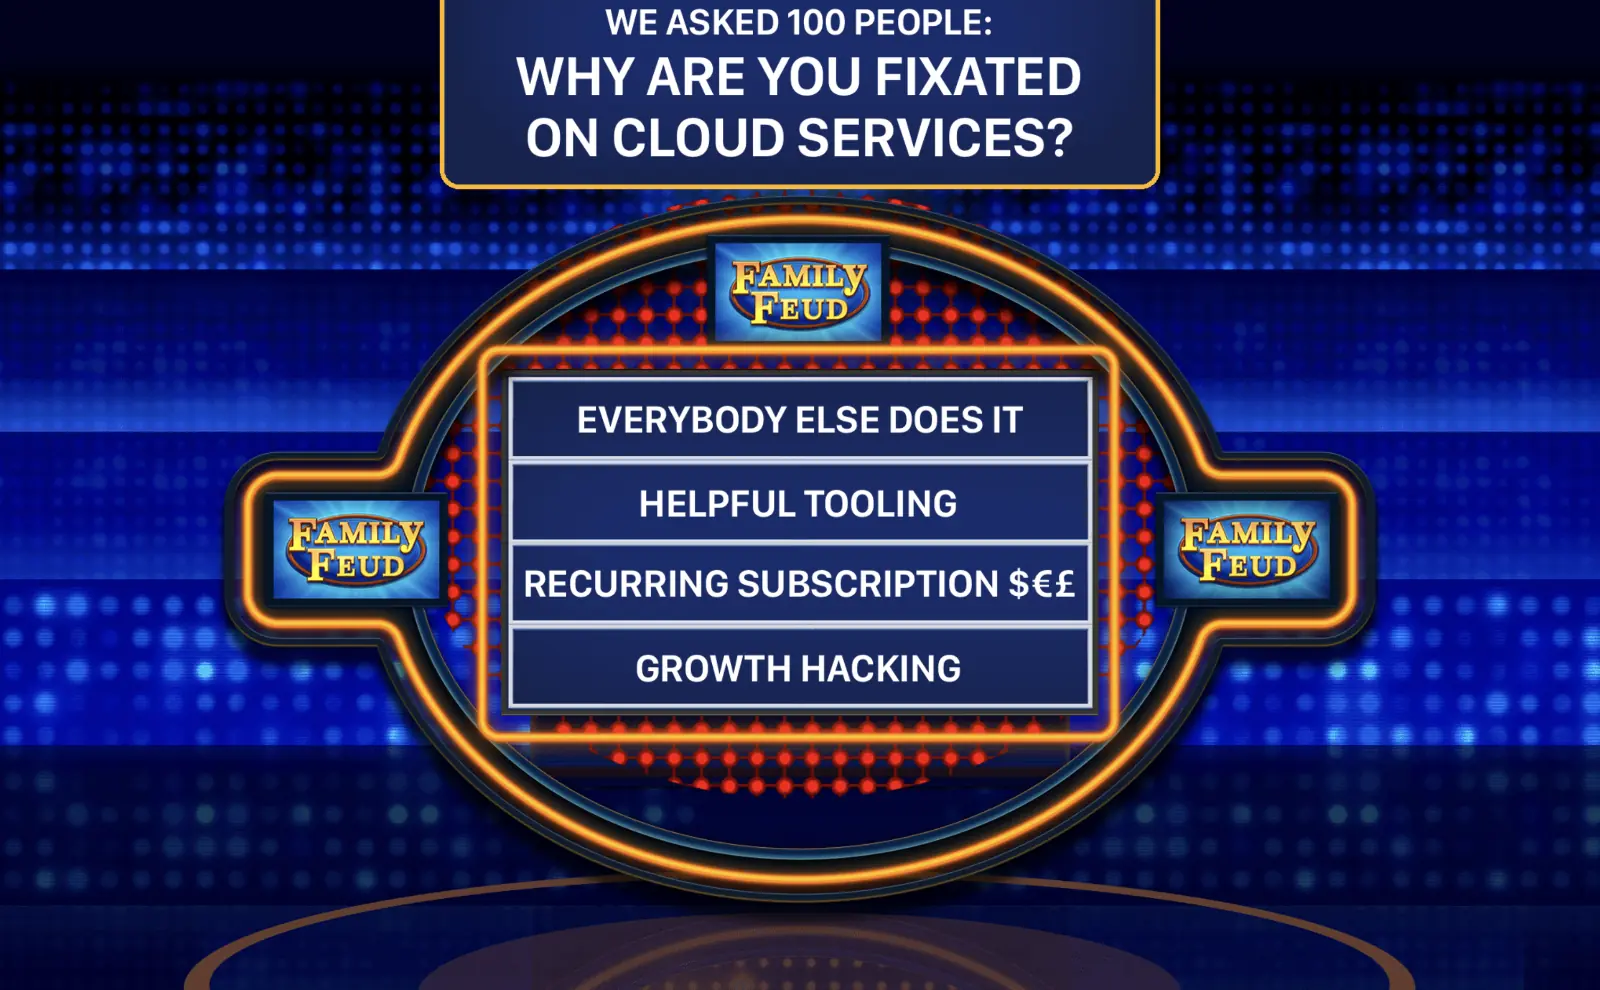 Family Feud game show board. We asked 100 people: Why are you fixated on cloud services? Answers: 1. Everybody else does it. 2. Helpful tooling. 3. Recurring revenue. 4. Growth hacking.